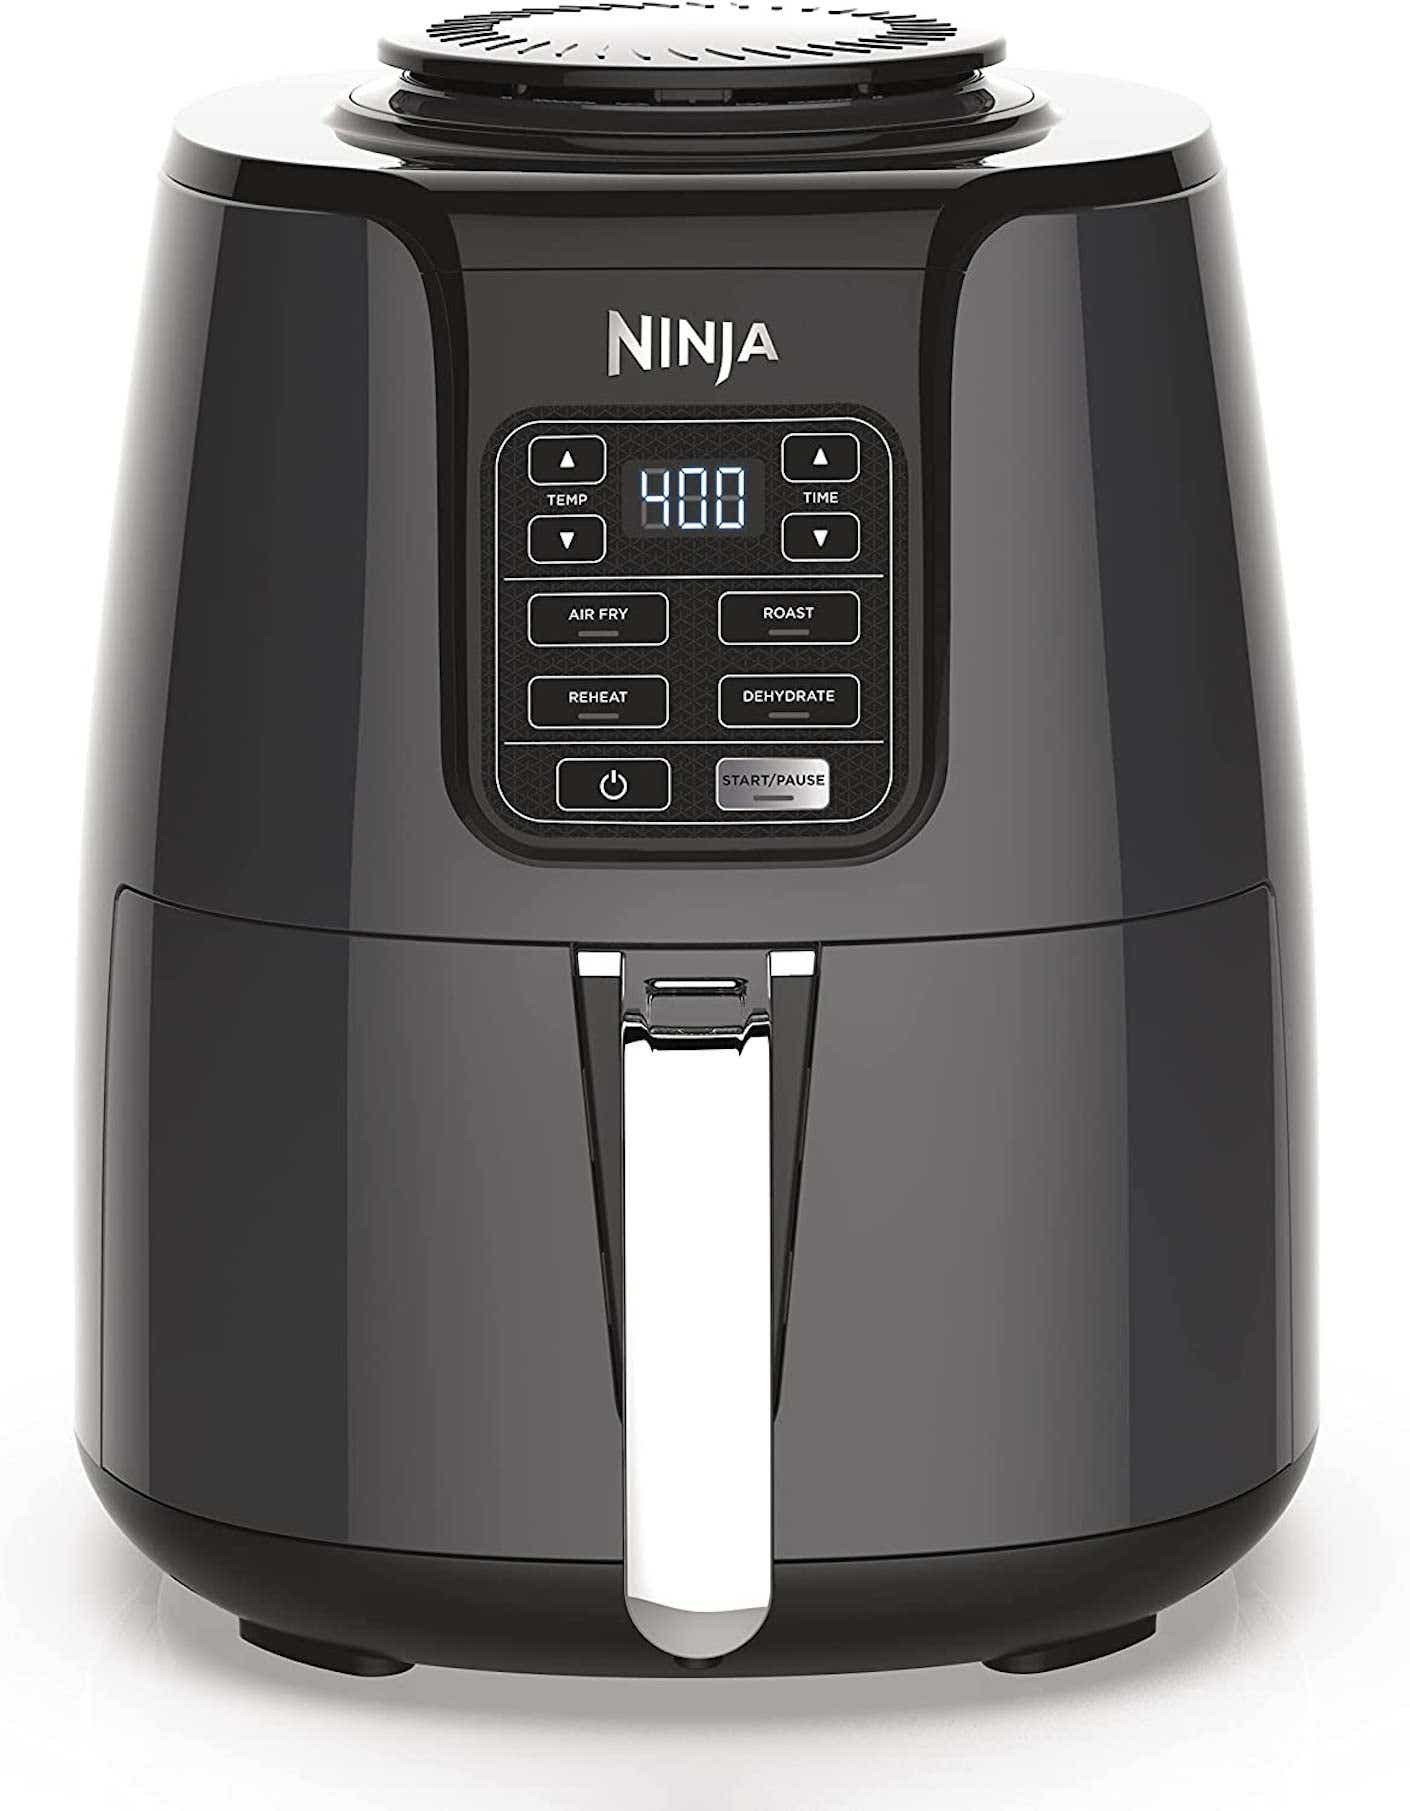 A black Ninja air fryer with a silver handle.